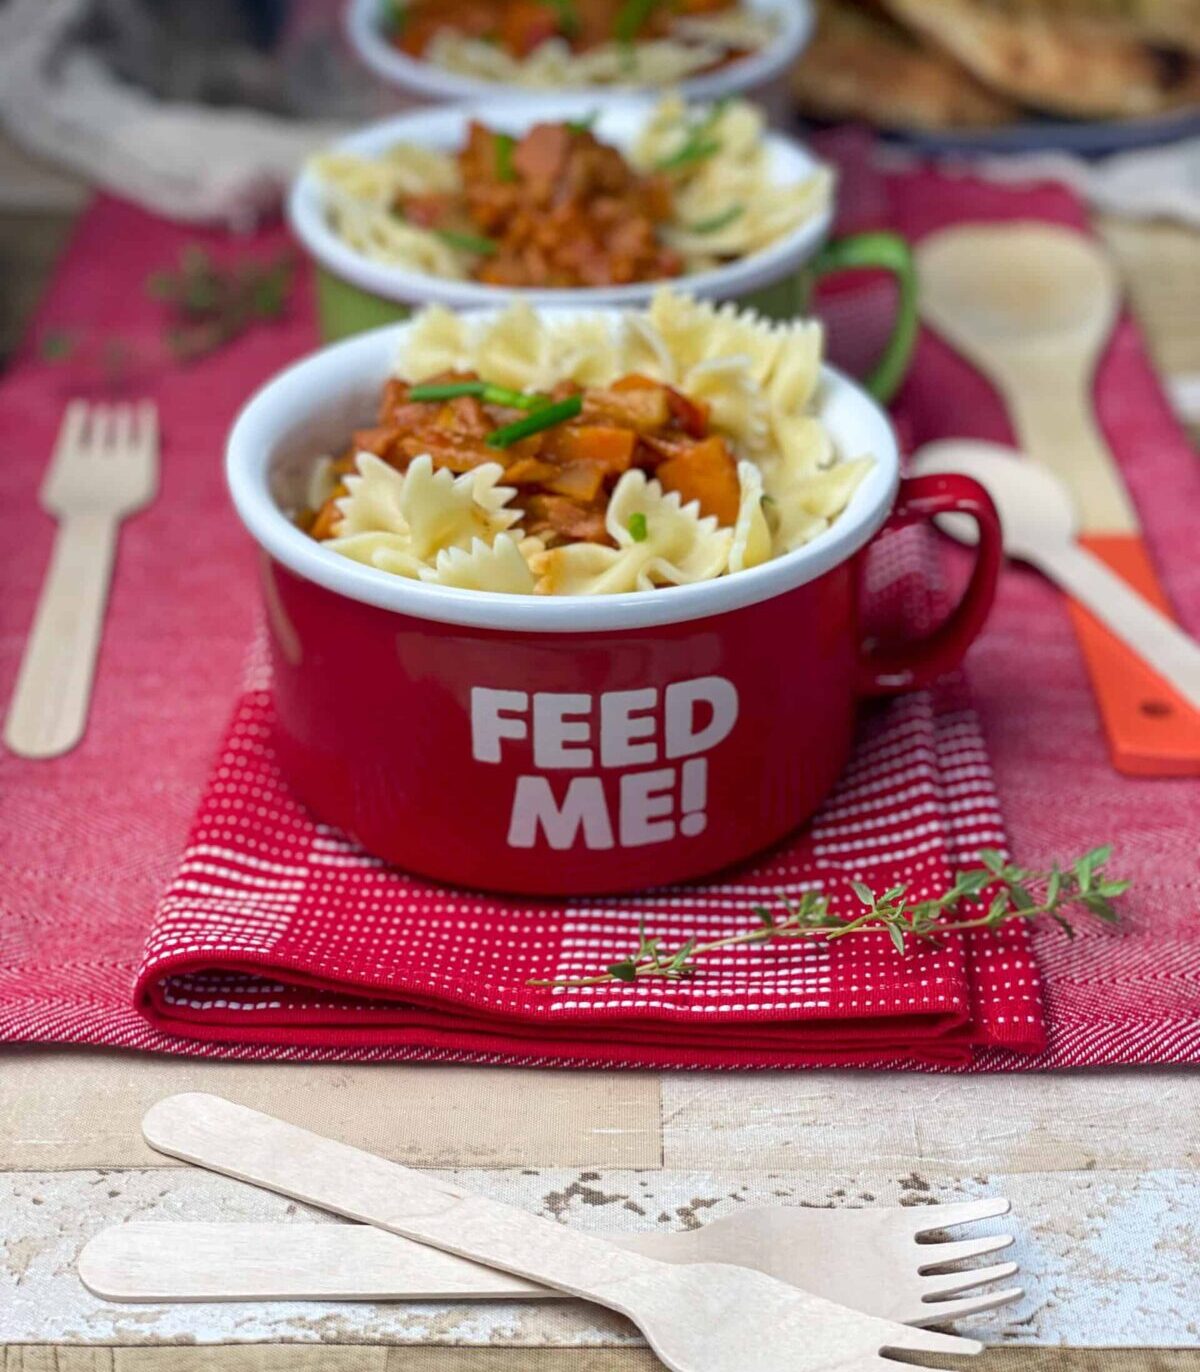 large red mug with 'feed me' text, forks to side, garlic bread in distance, red background.